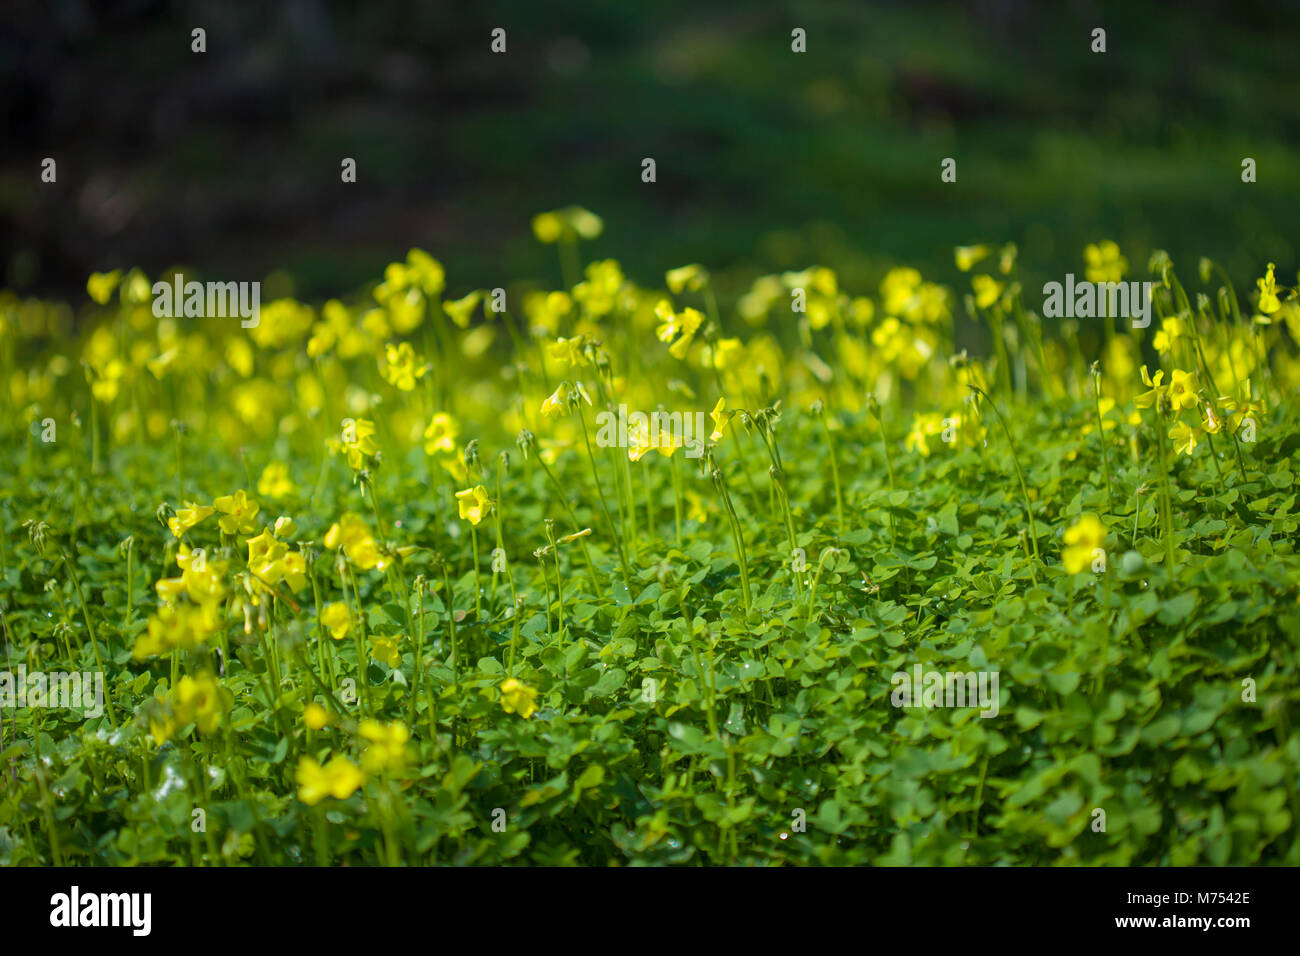 yellow flowers of Oxalis pes-caprae, Bermuda buttercup, invasive species and noxious weed Stock Photo